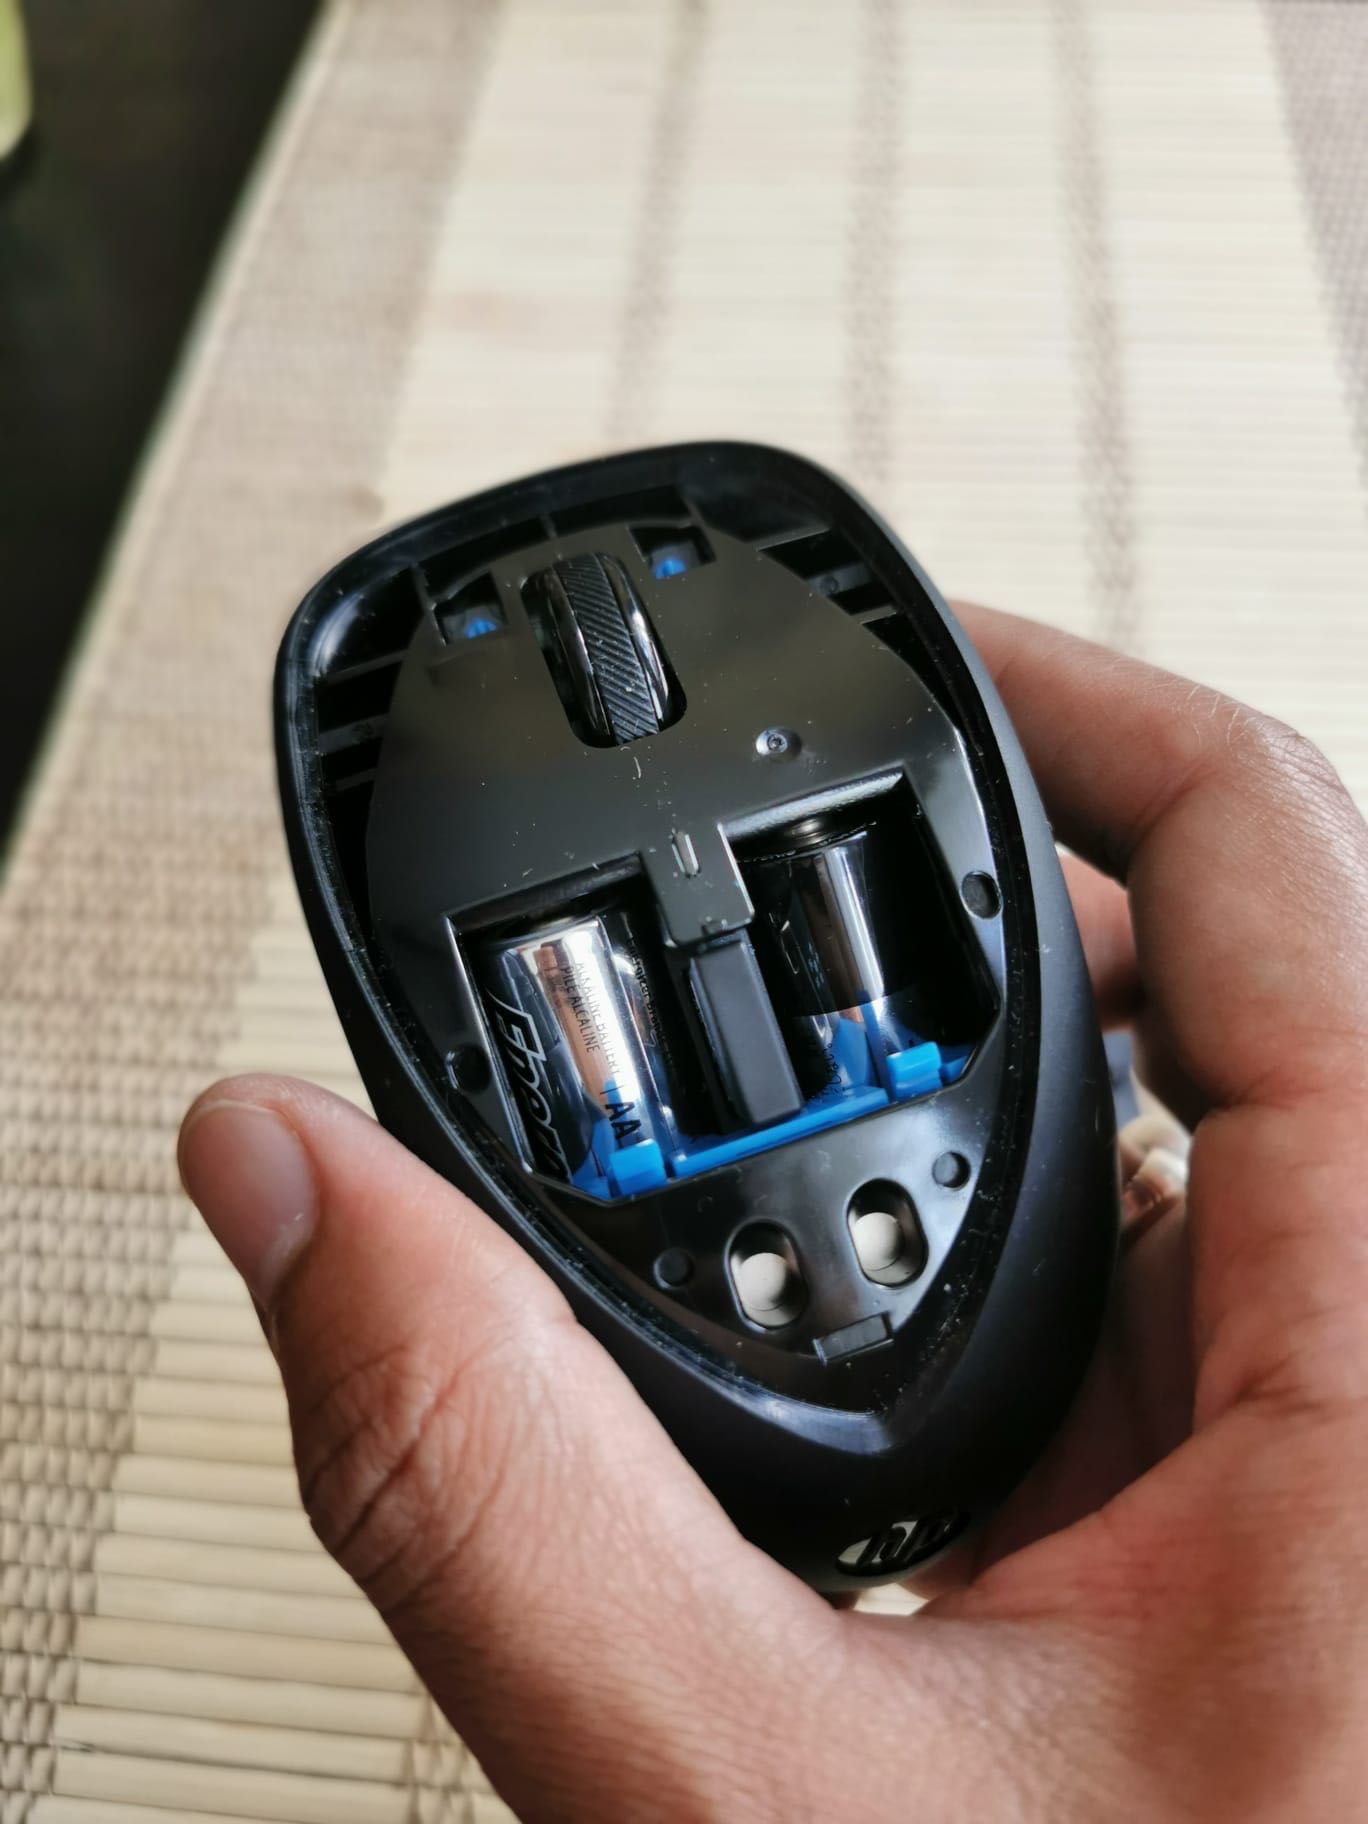 New HP Wireless Comfort Grip Mouse